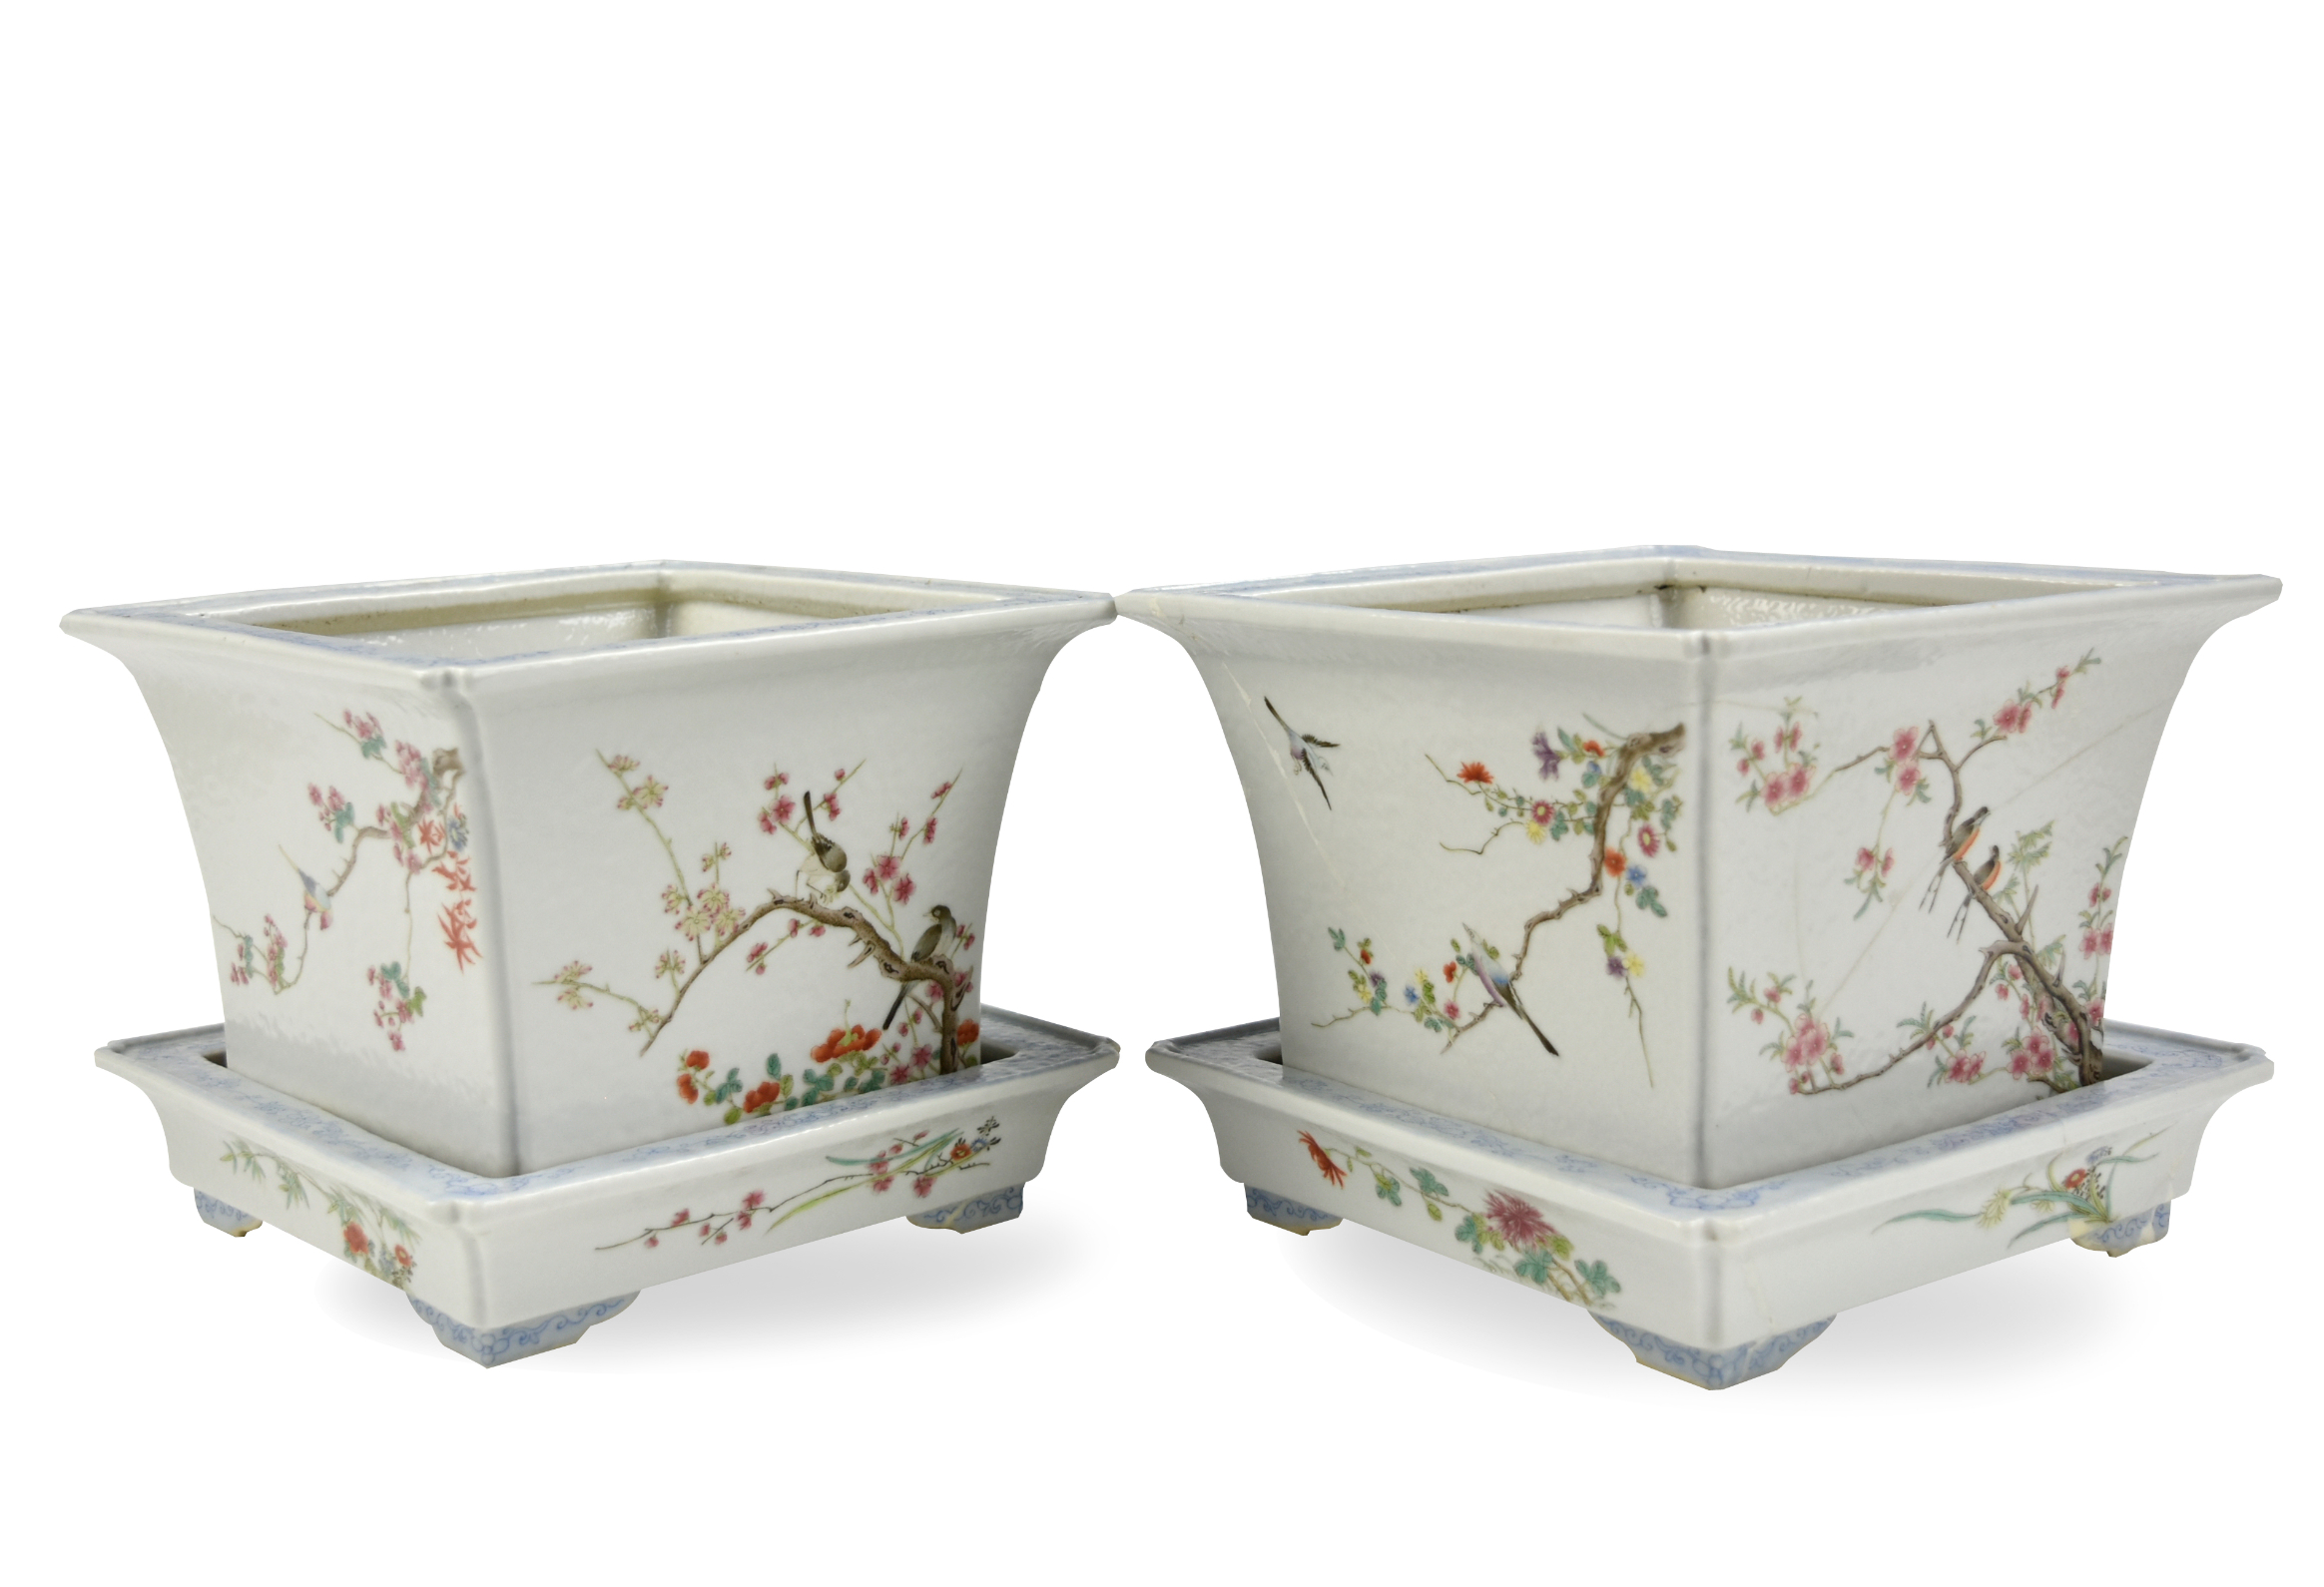 PAIR OF CHINESE FAMILLE ROSE PLANTERS,19-20TH